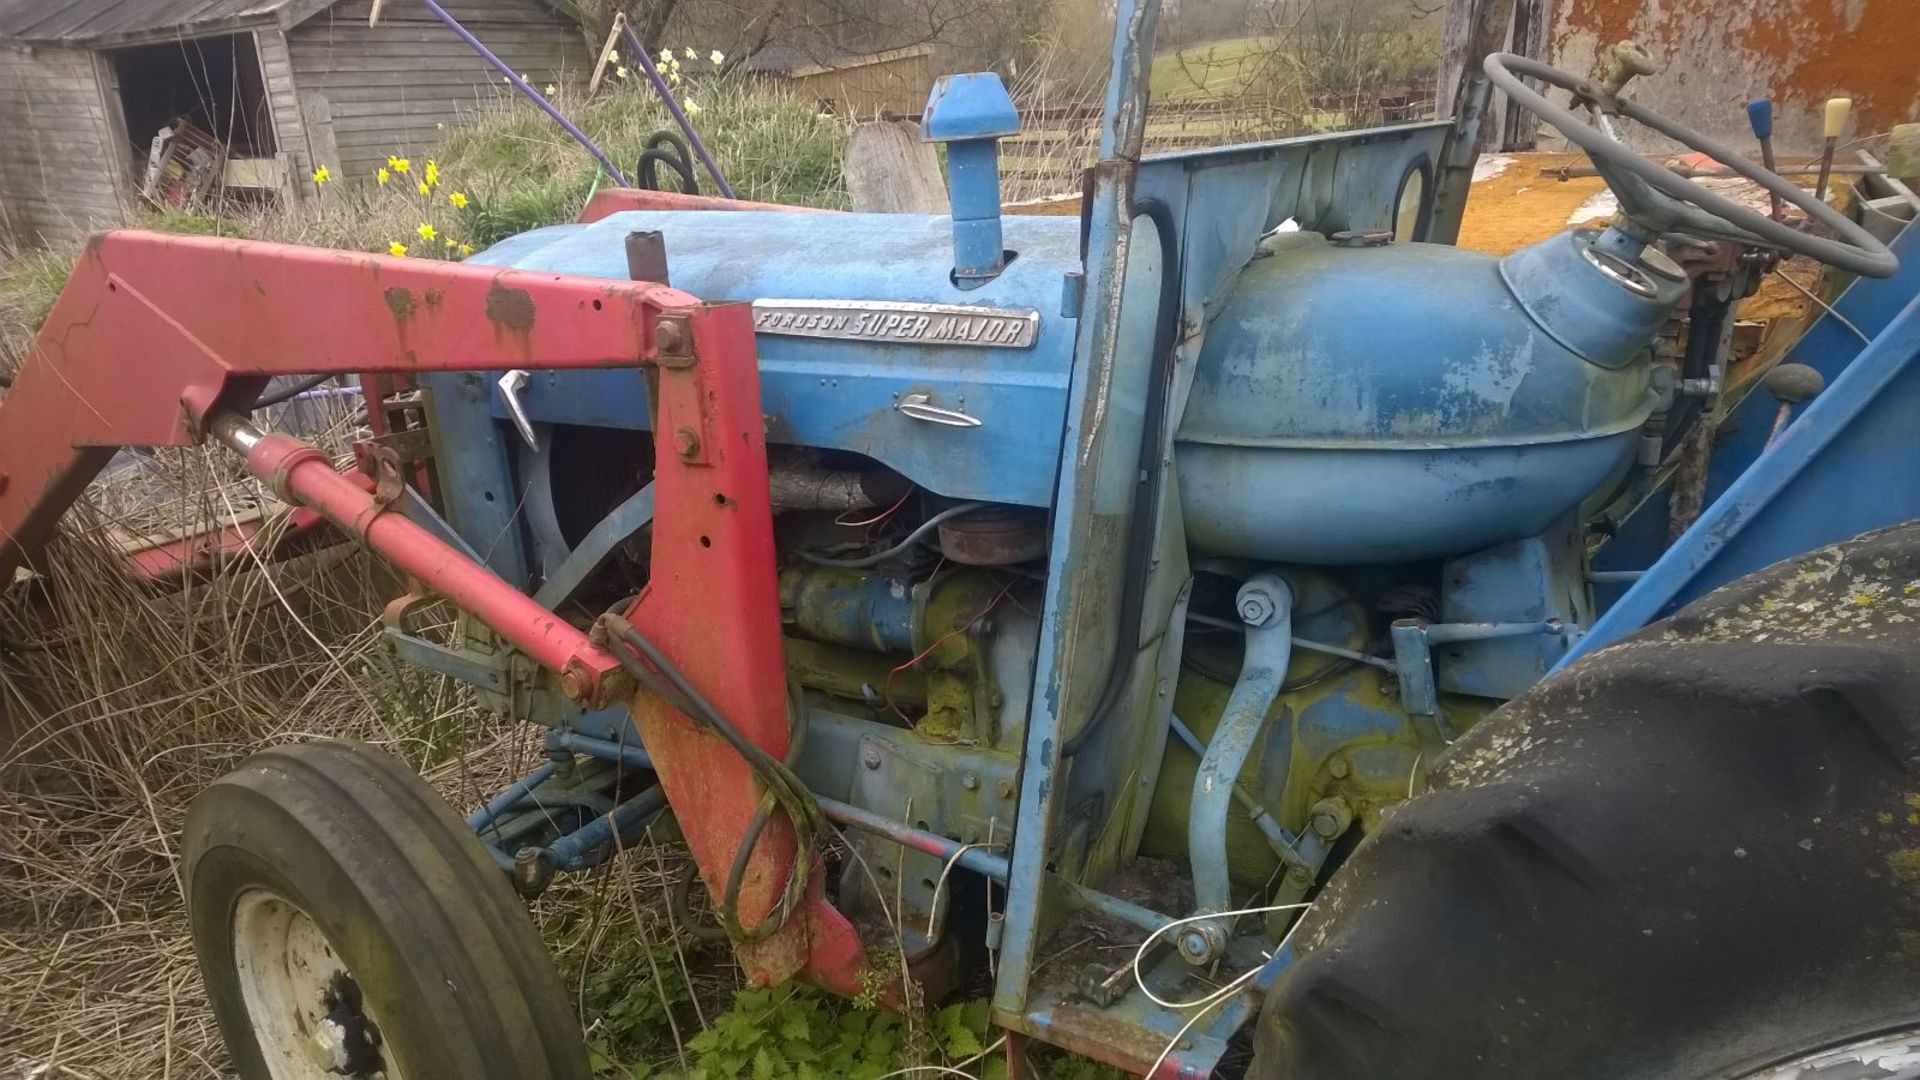 FORDSON  SUPER MAJOR c/w POWER LOADER   WE HAVENT HEARD IT RUNNING YET BUT WE ARE INTENDING TO GET - Image 17 of 20